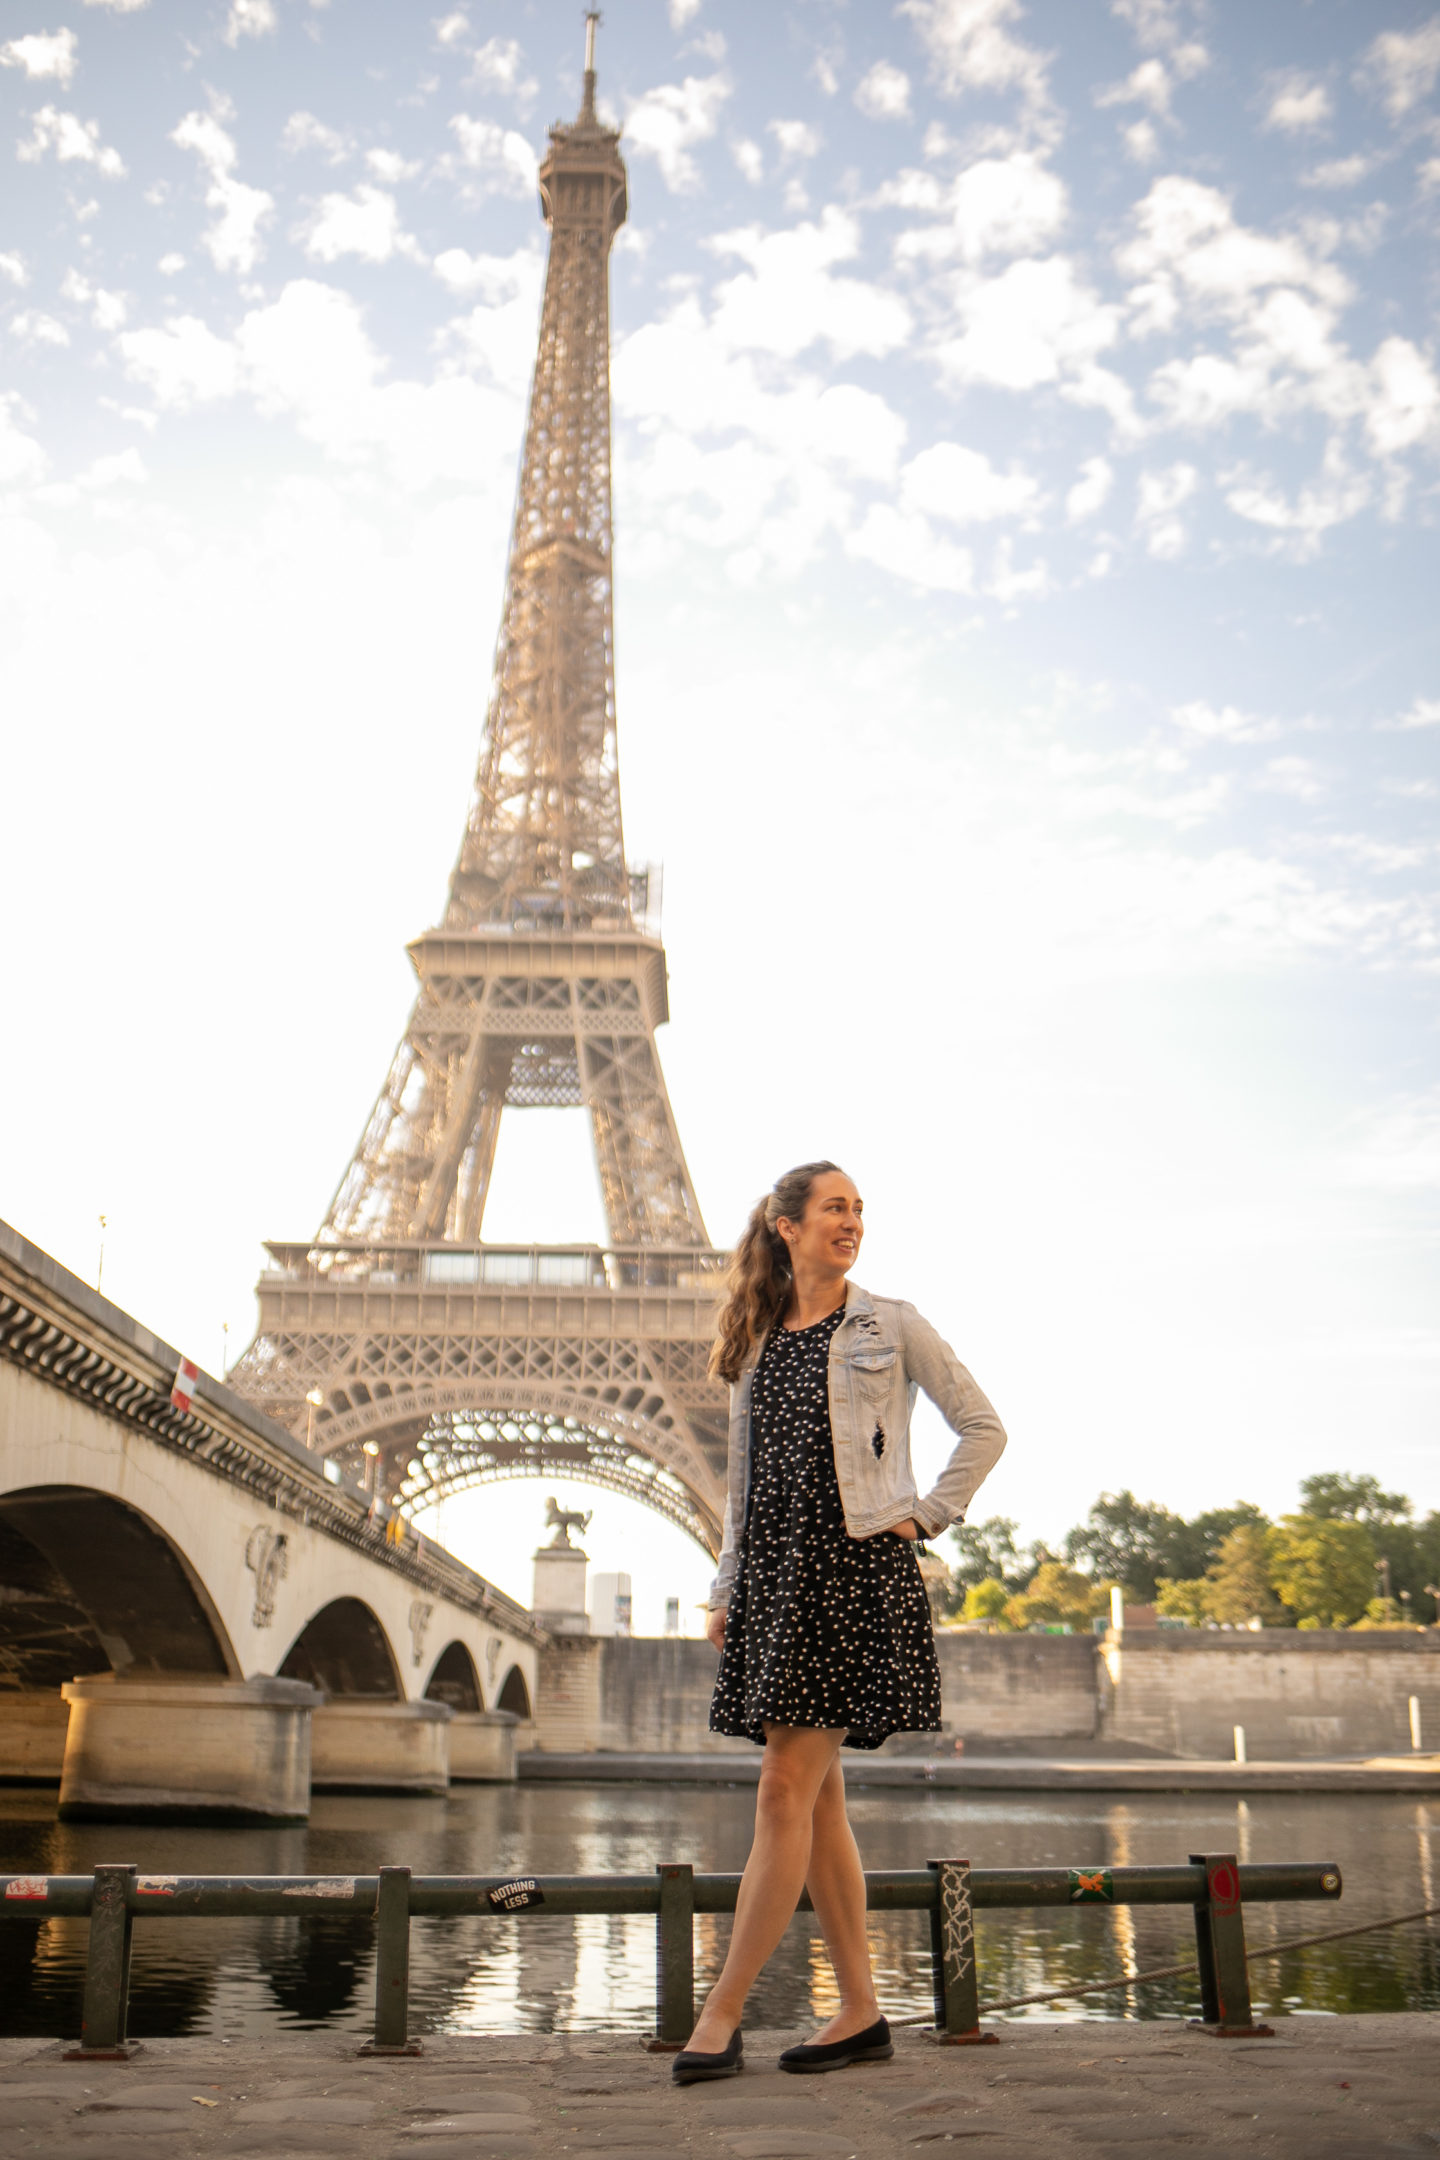 Young woman in blue dress and denim jacket standing in front of River Siene with Eiffel Tower in background